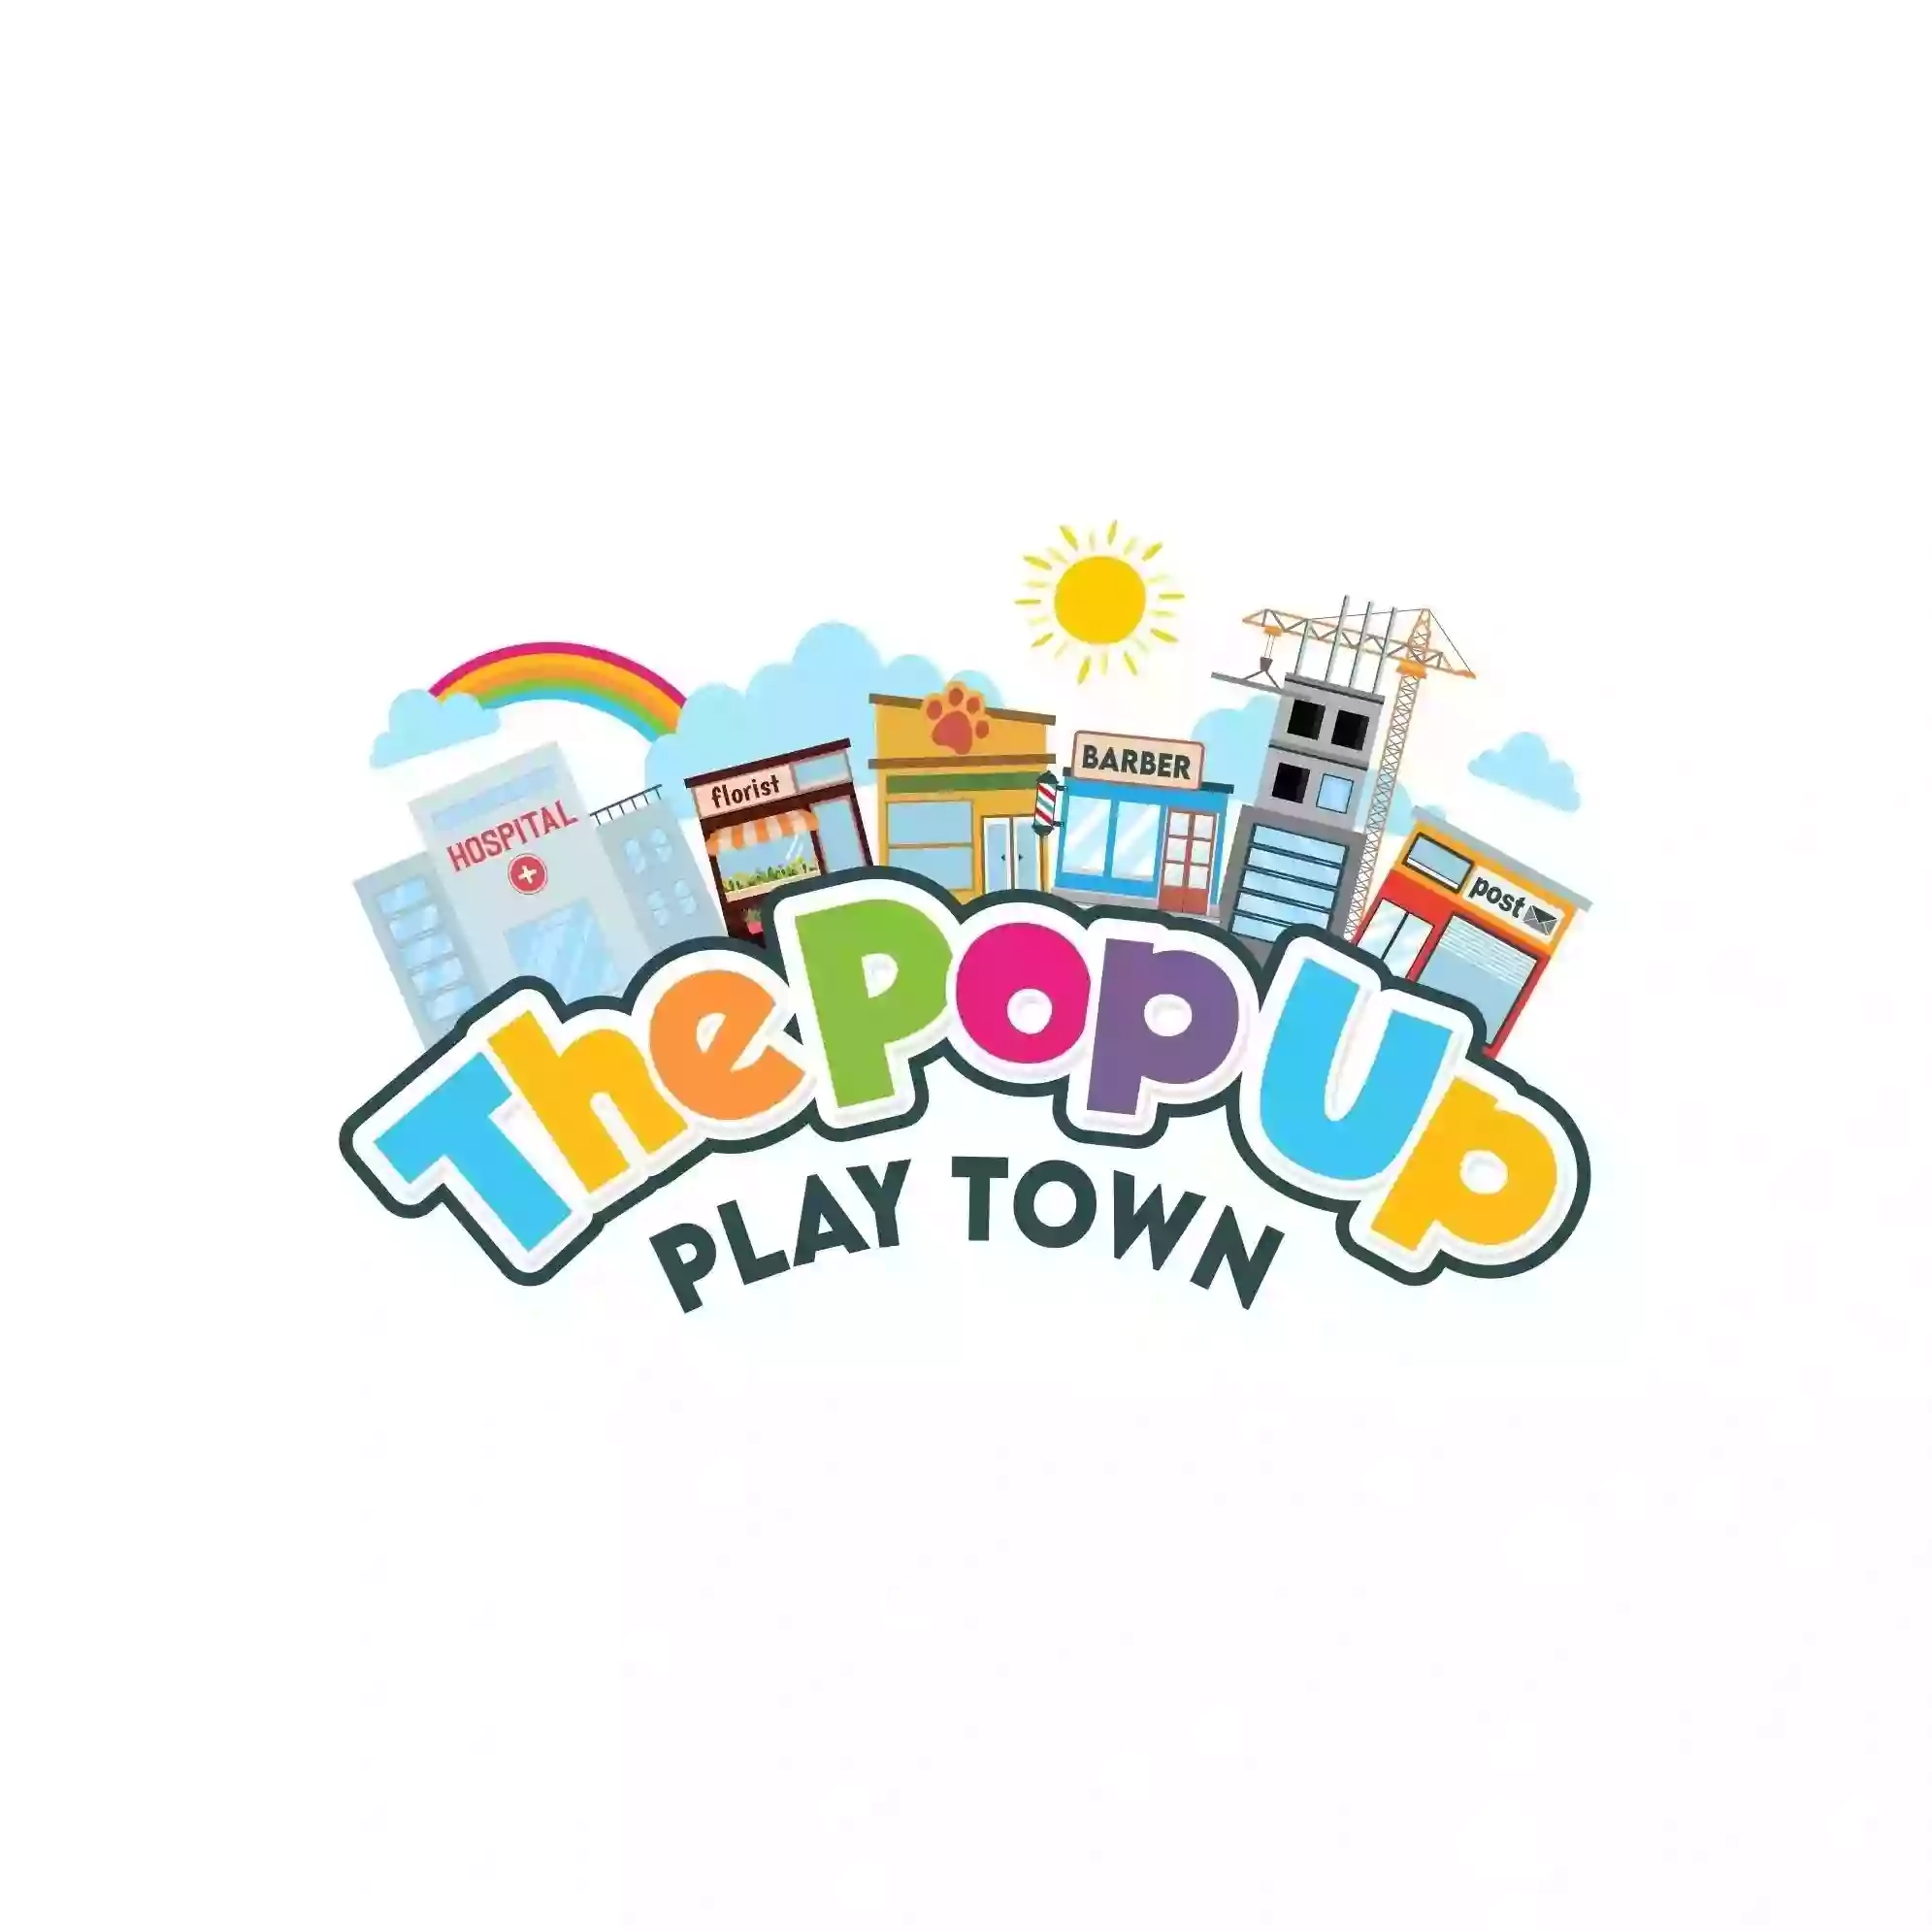 The Pop Up Play Town